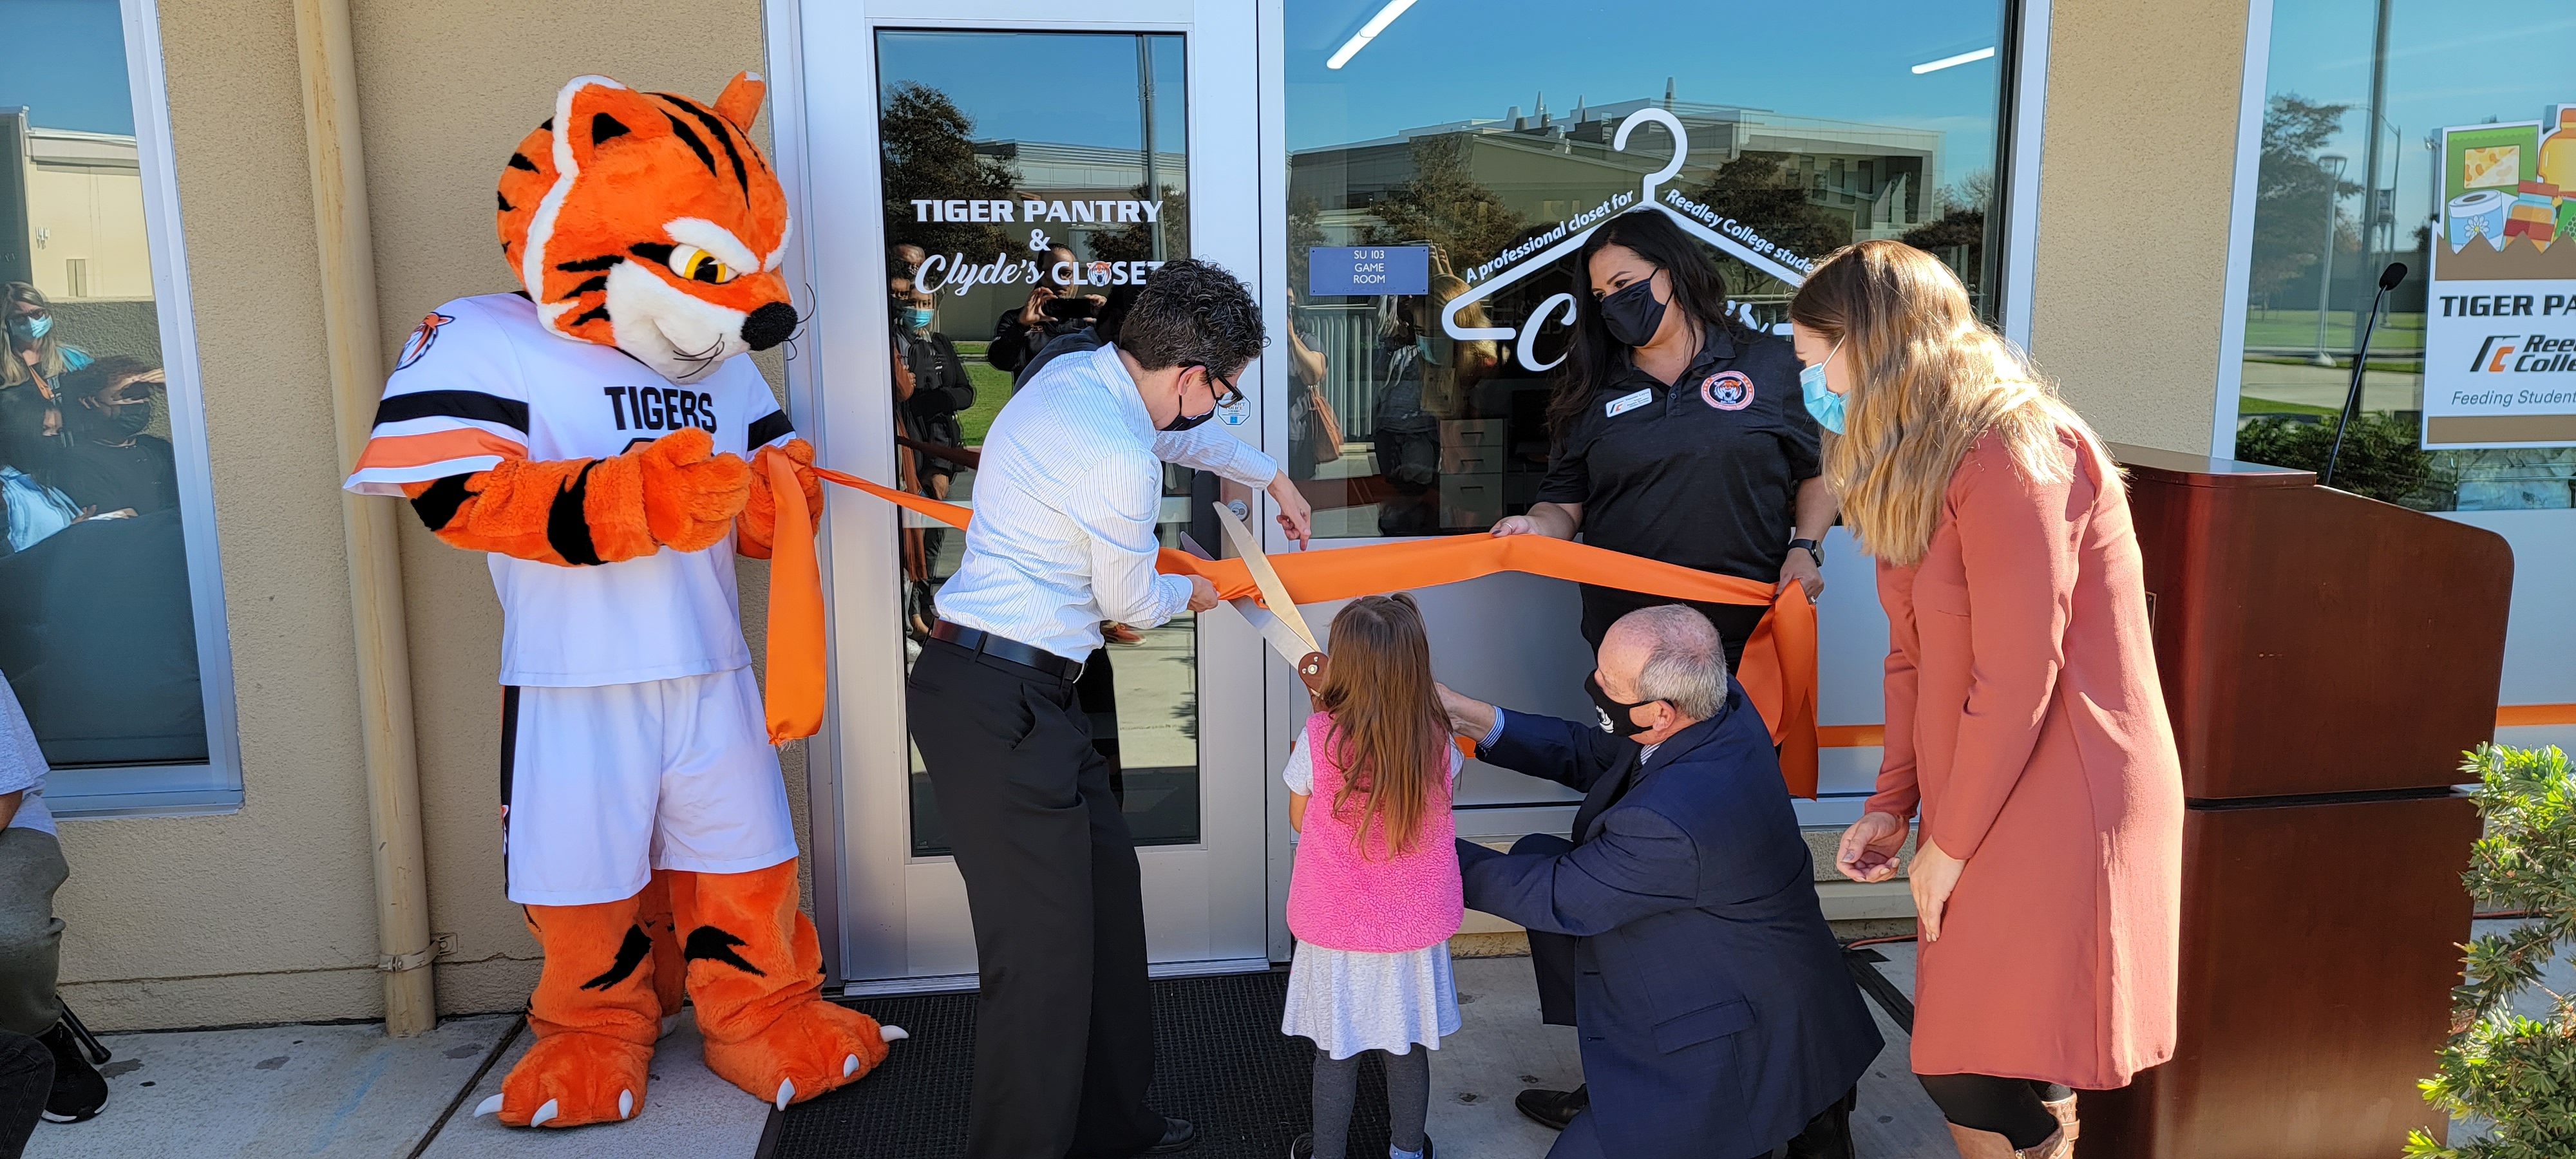 President Buckley and Clyde cutting ribbon on Tiger Pantry